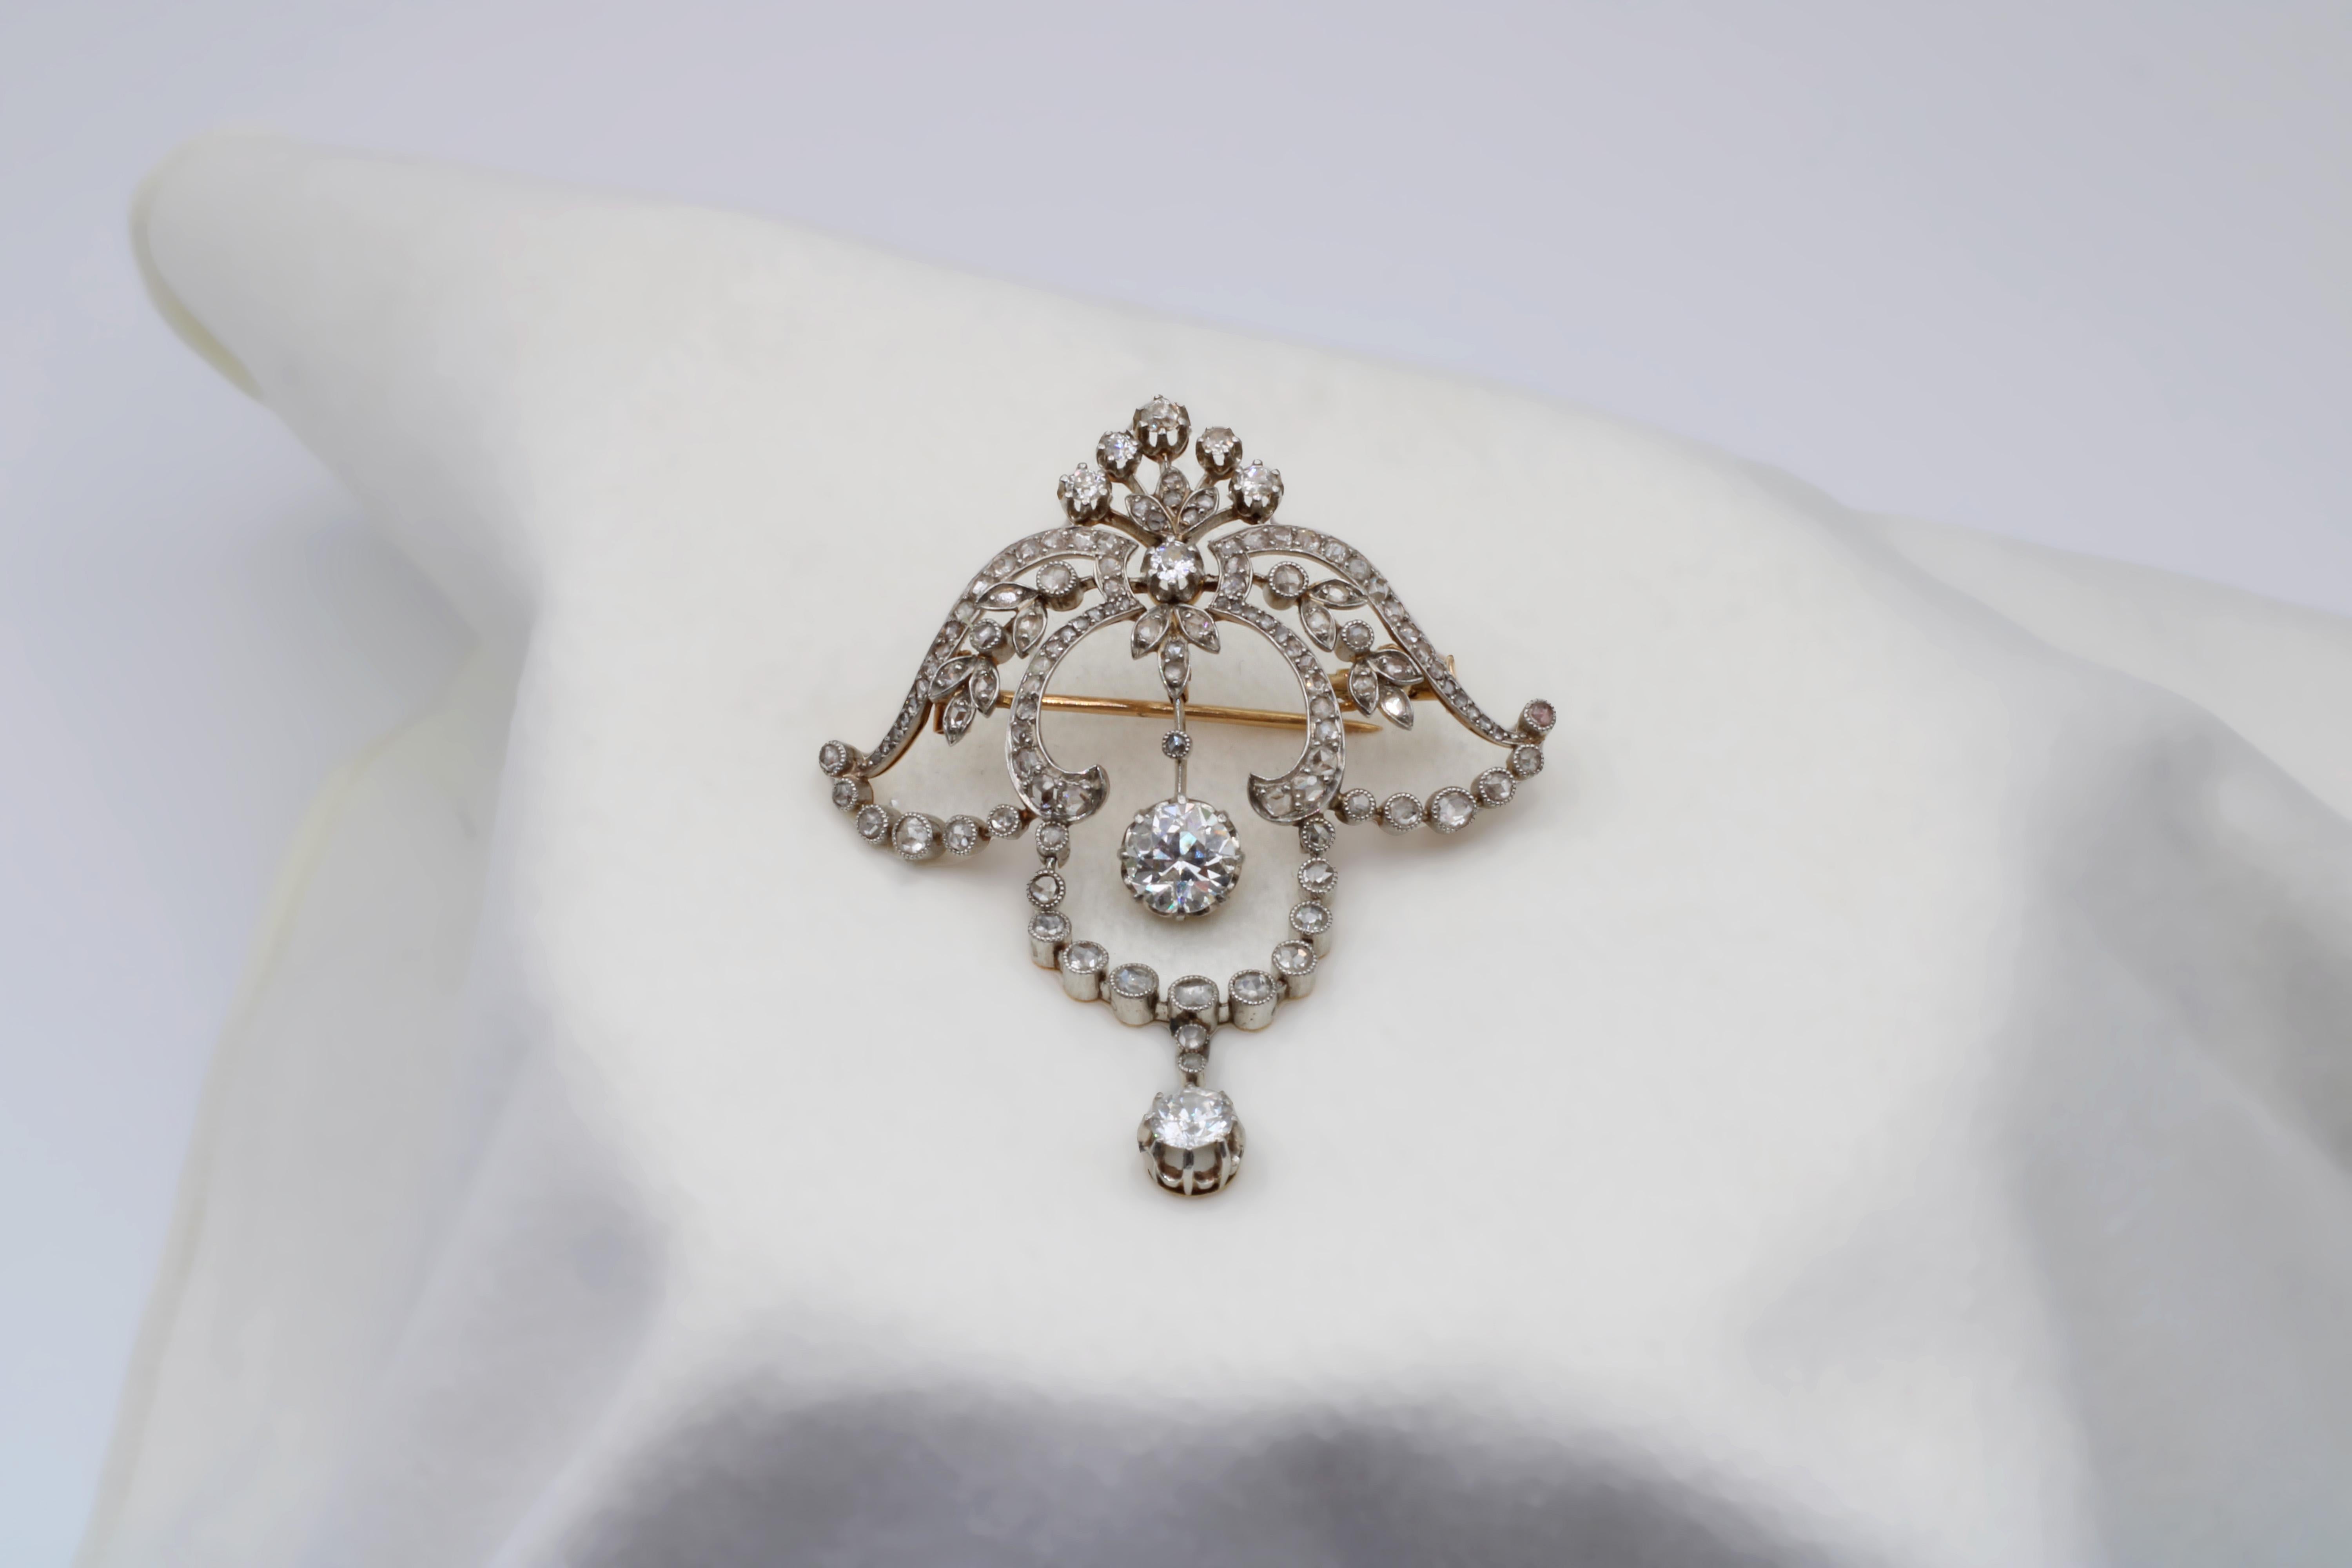 A classic Victorian drop-brooch featuring centerpieces of Old European diamonds enveloped by concaving and curving rose-cuts patterns, especially floral patterns that burst all across the piece and amplify its beauty. In great condition despite its